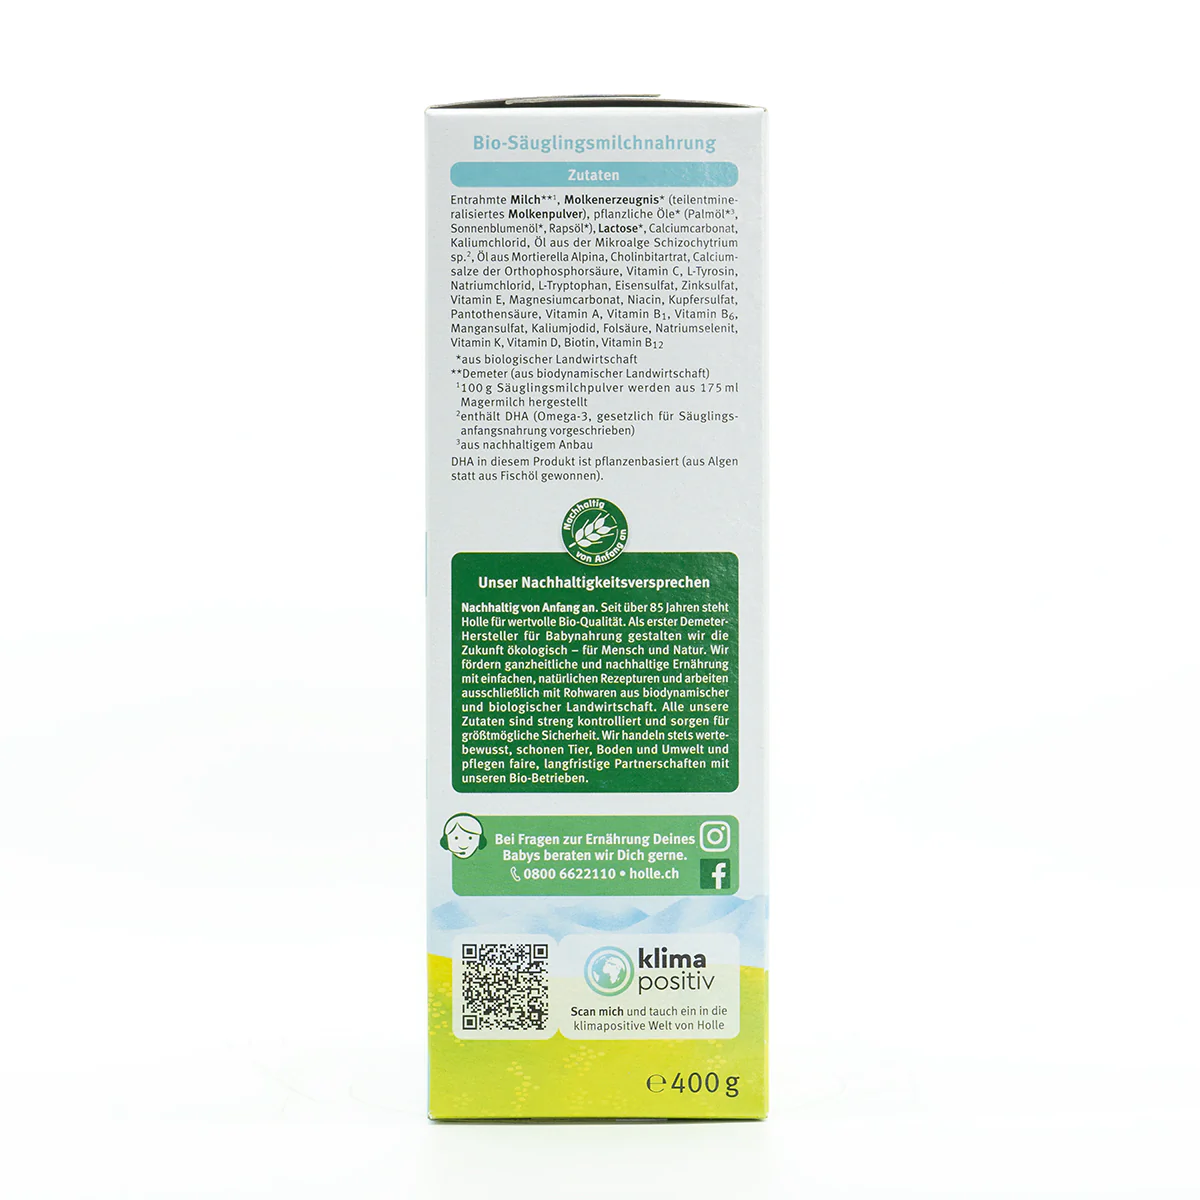 Holle Organic Infant Formula Stage 1 - 10 Boxes